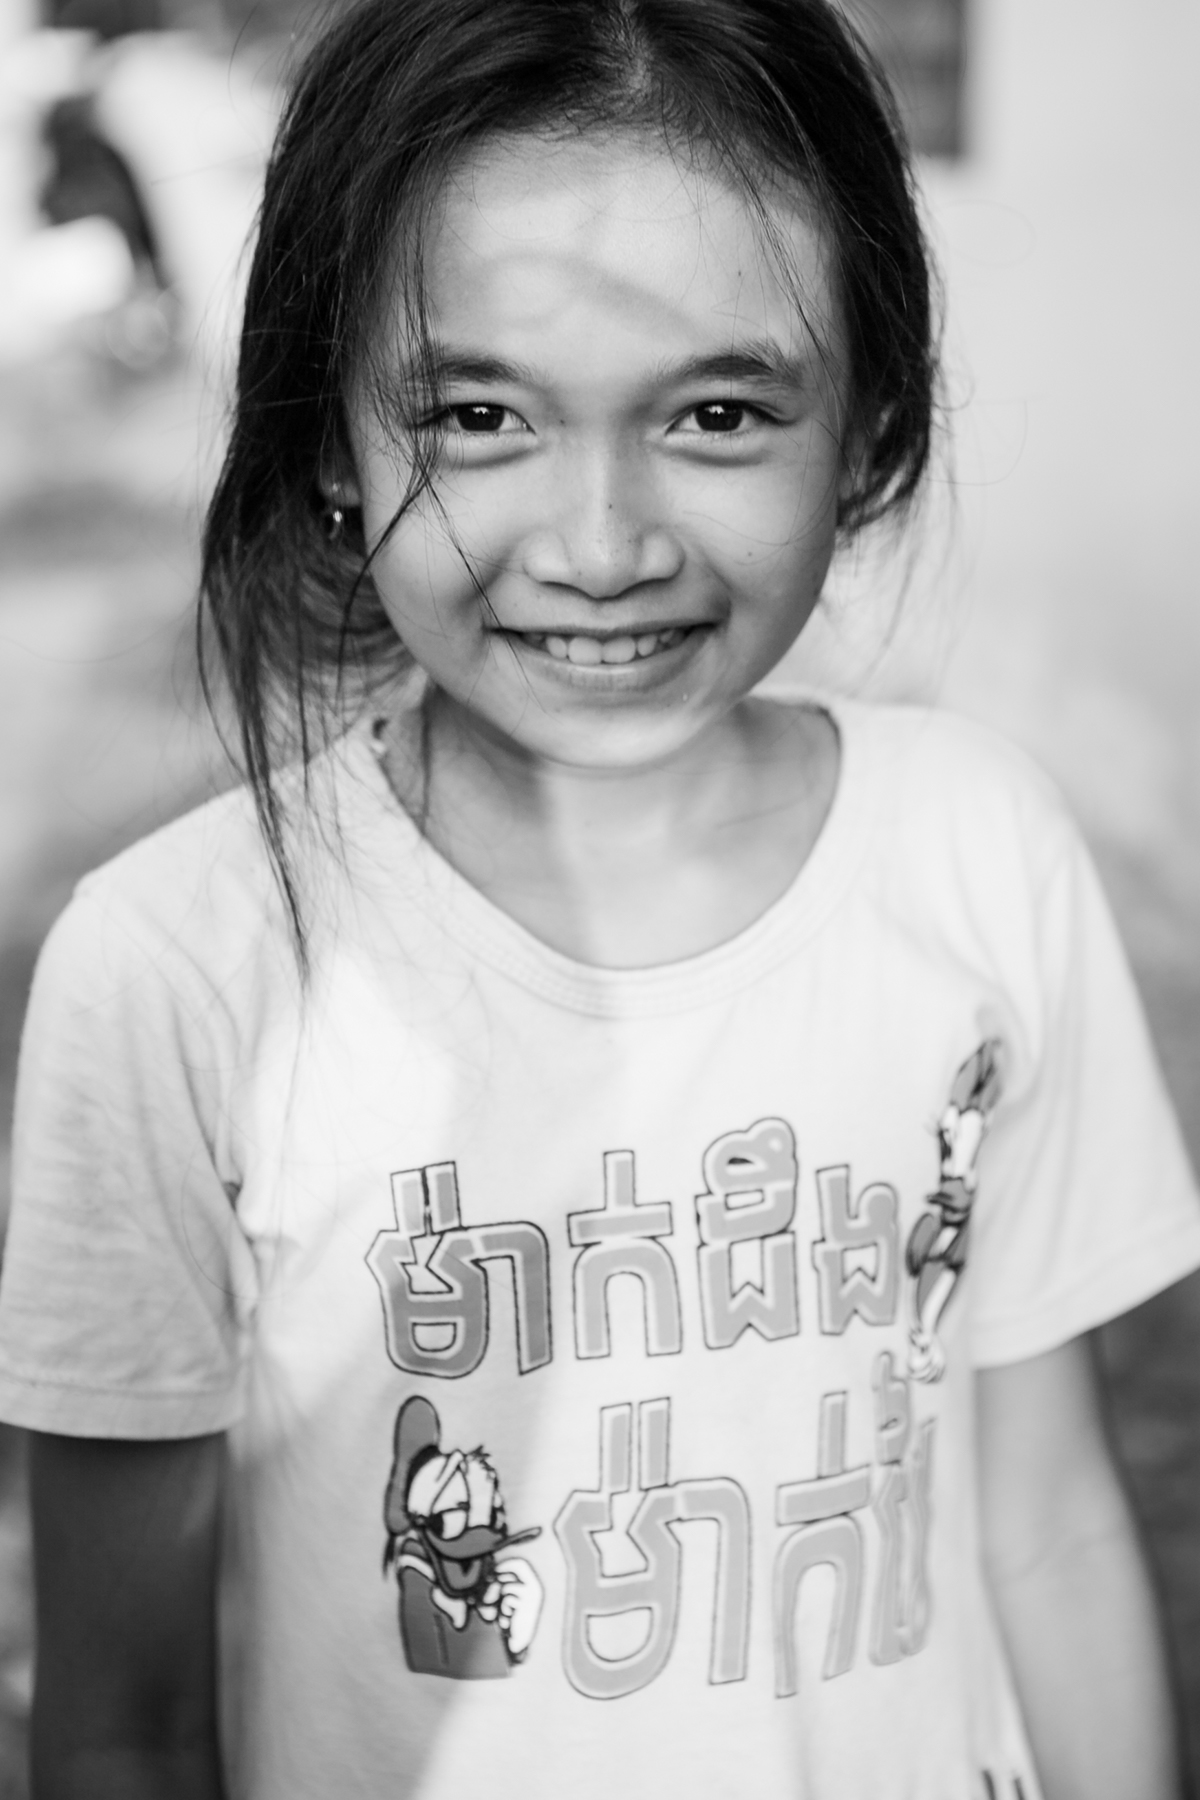 kids Photography  school Cambodia portraits learning Fun Project play children